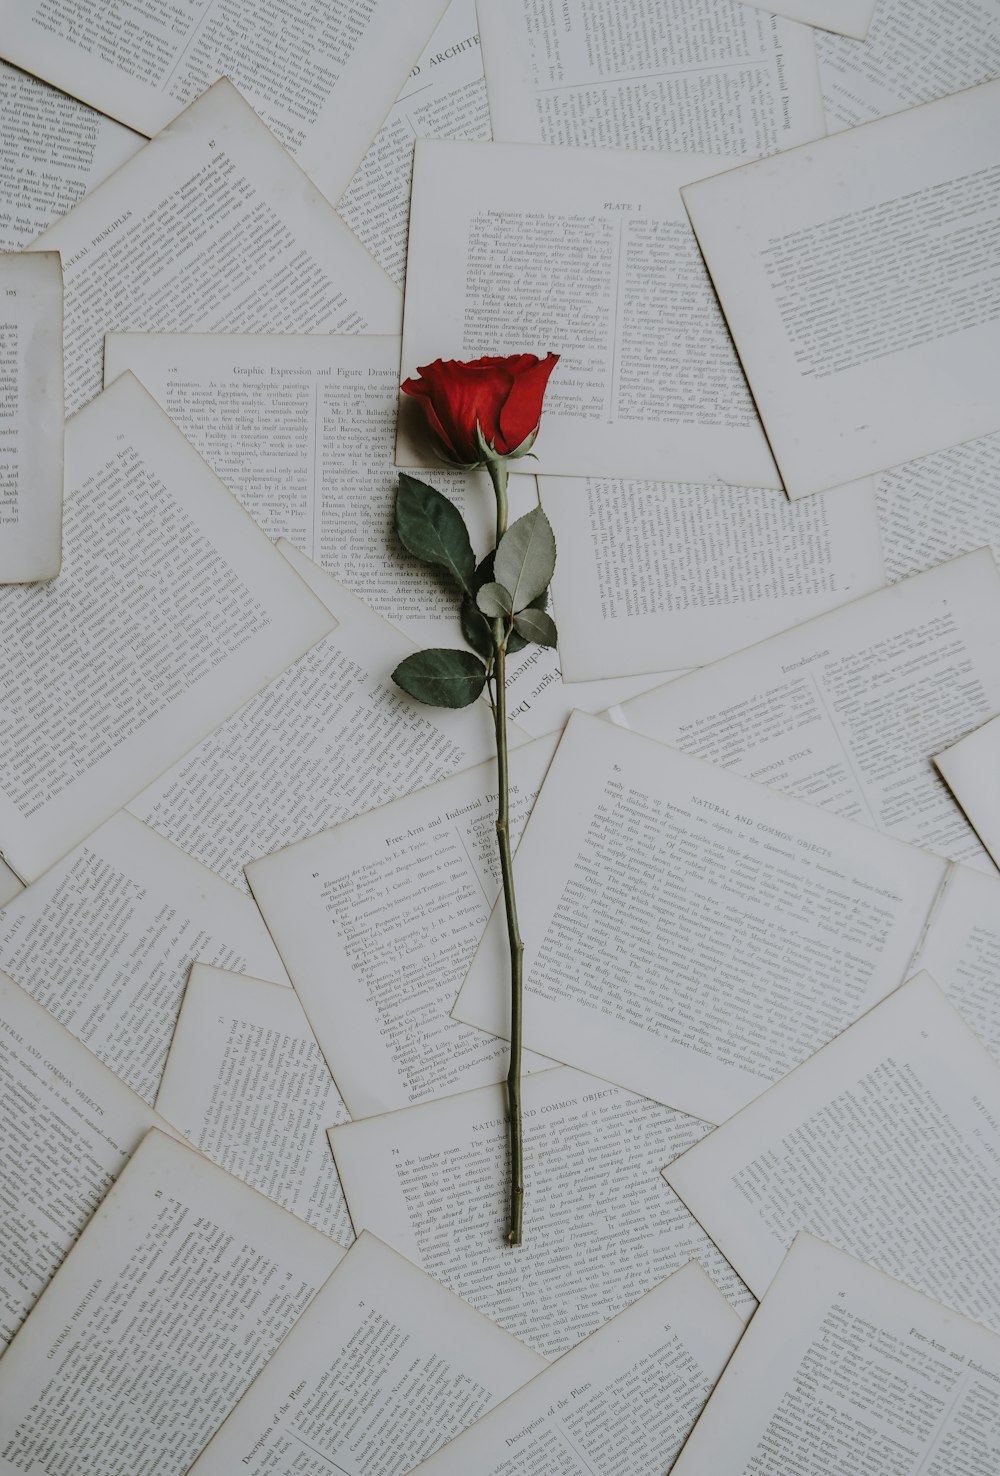 100+ Love Letter Pictures [HD] | Download Free Images on Unsplash